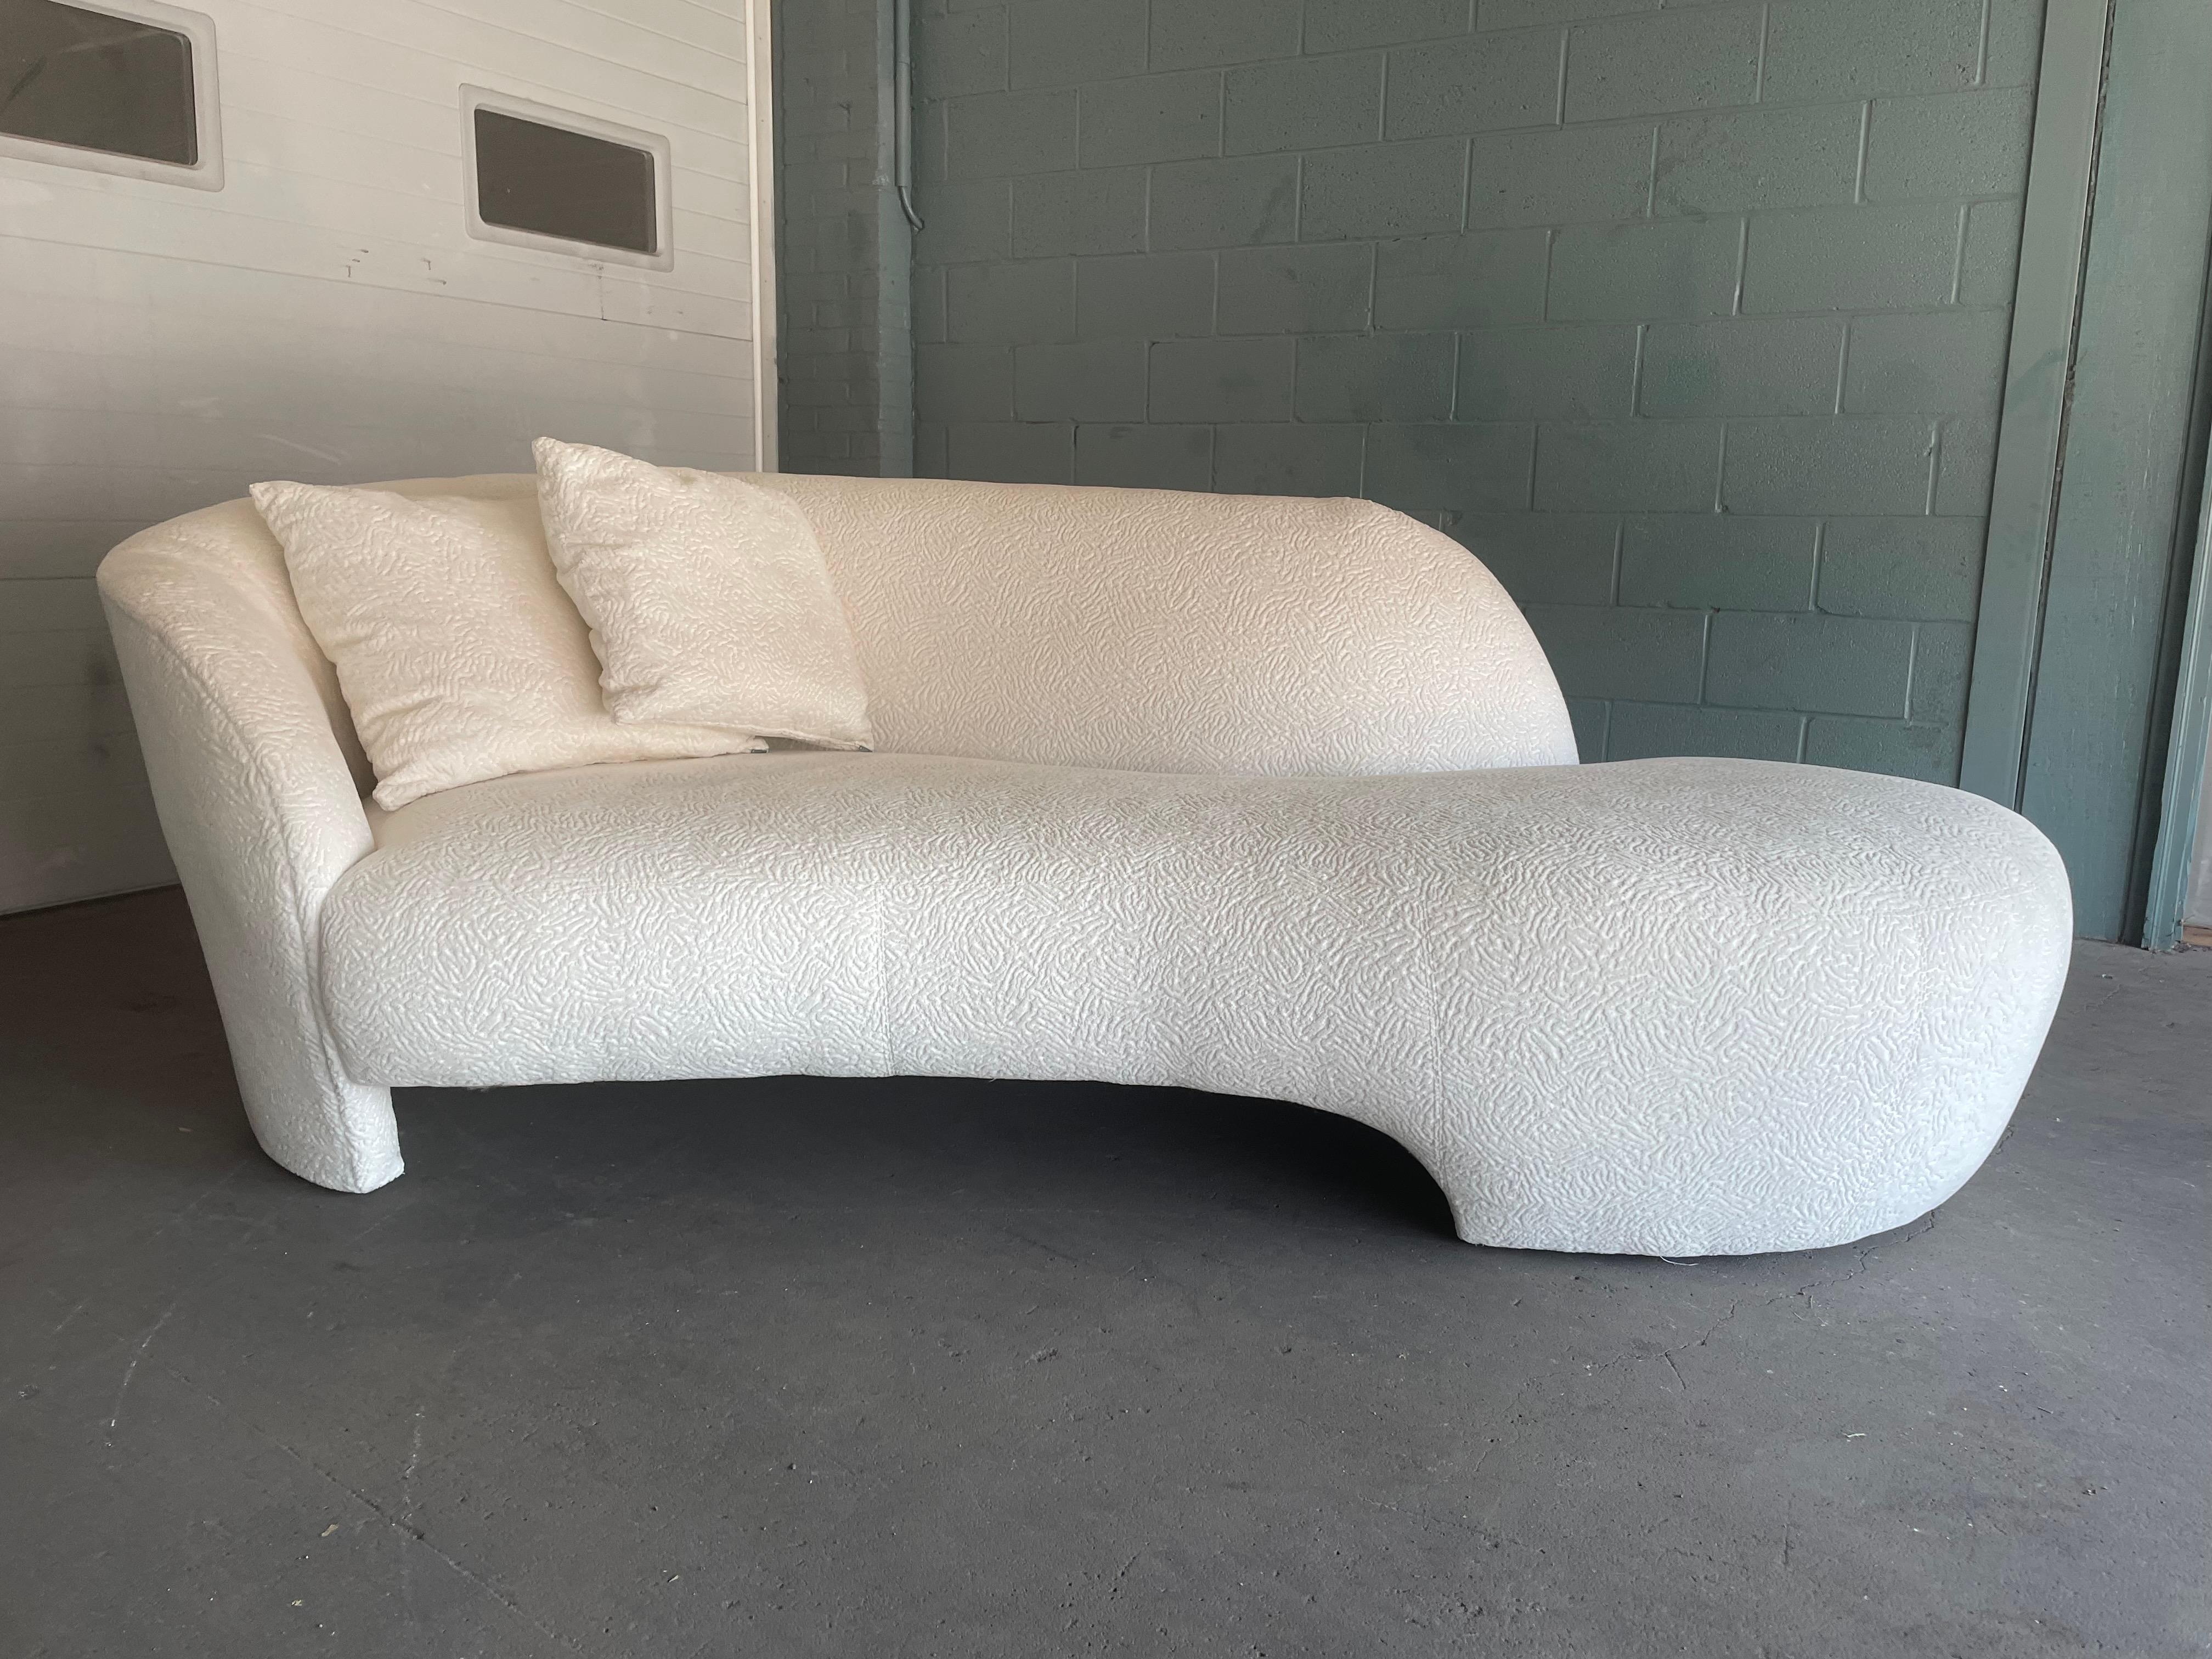 Hollywood Regency Stunning White Weiman Preview Chaise Lounge